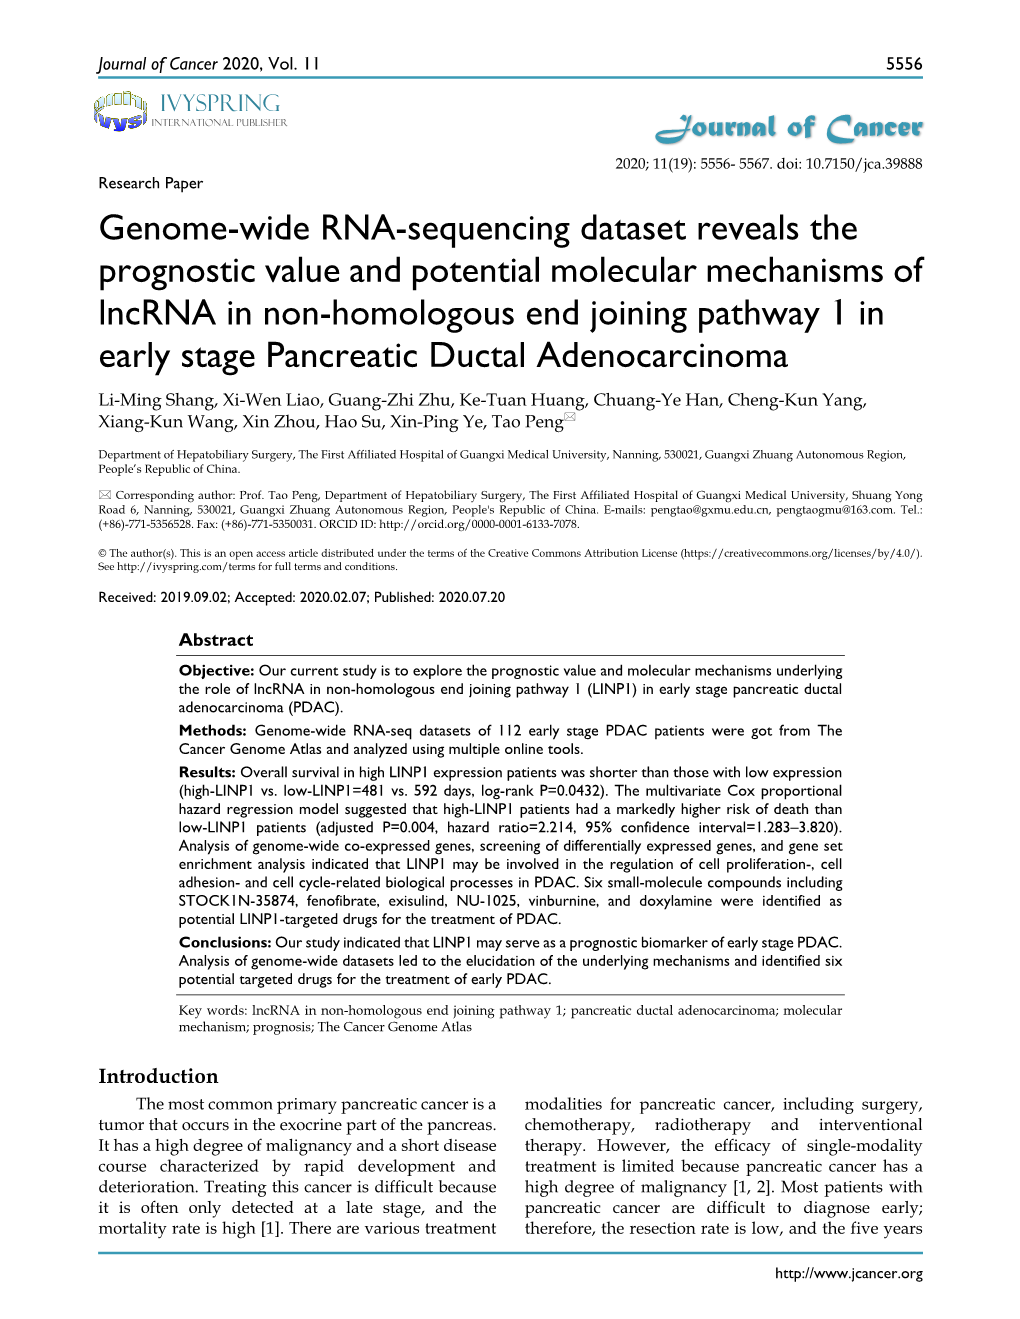 Genome-Wide RNA-Sequencing Dataset Reveals the Prognostic